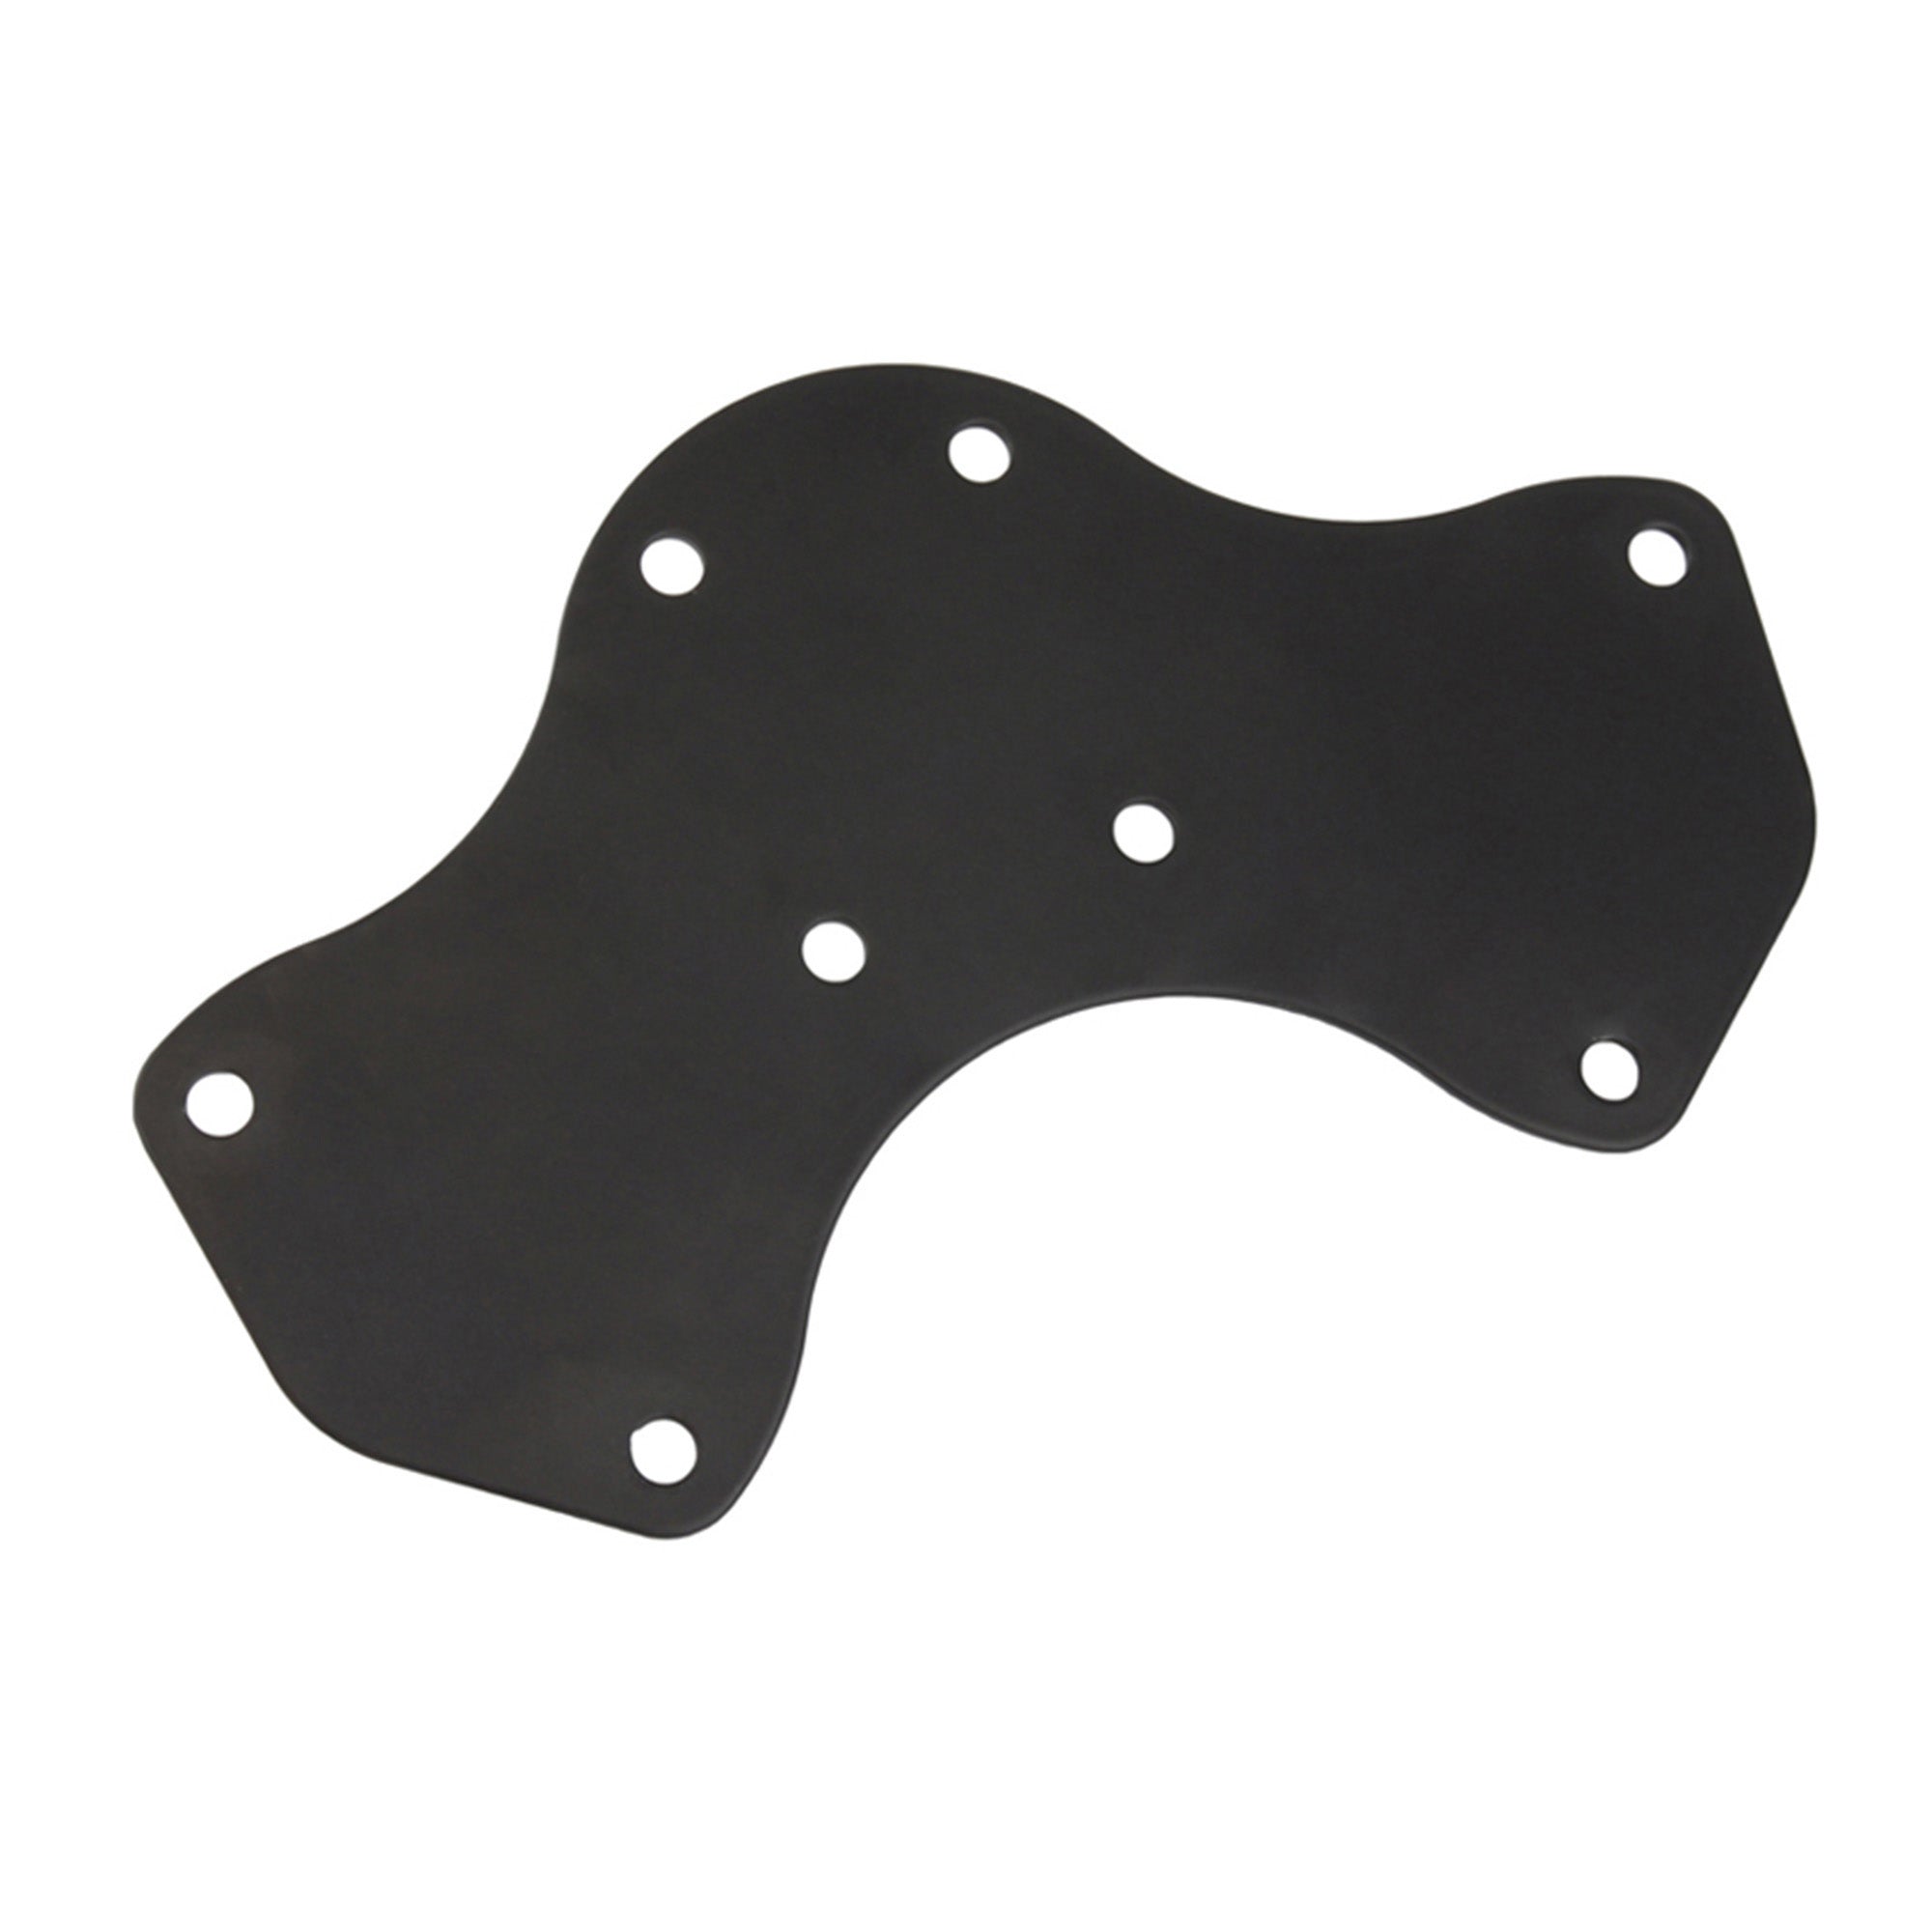 RAM Dual Adapter Plate for Twist-Lock Suction Cups